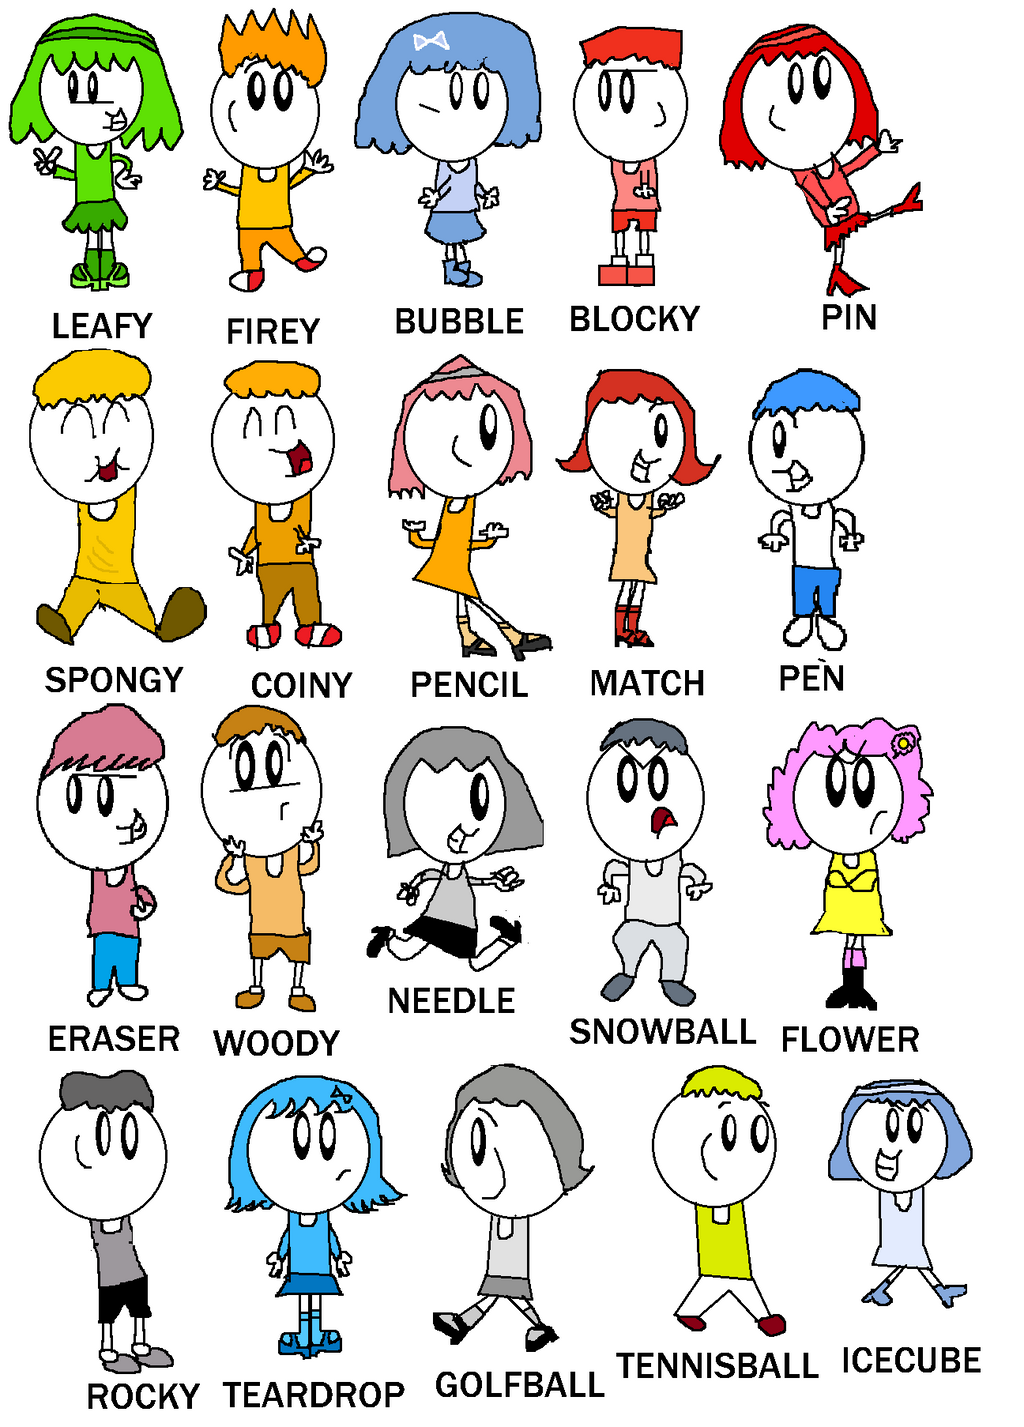 Human objects on BFDI-OCS-AND-FANART - DeviantArt Related to bfdi character...